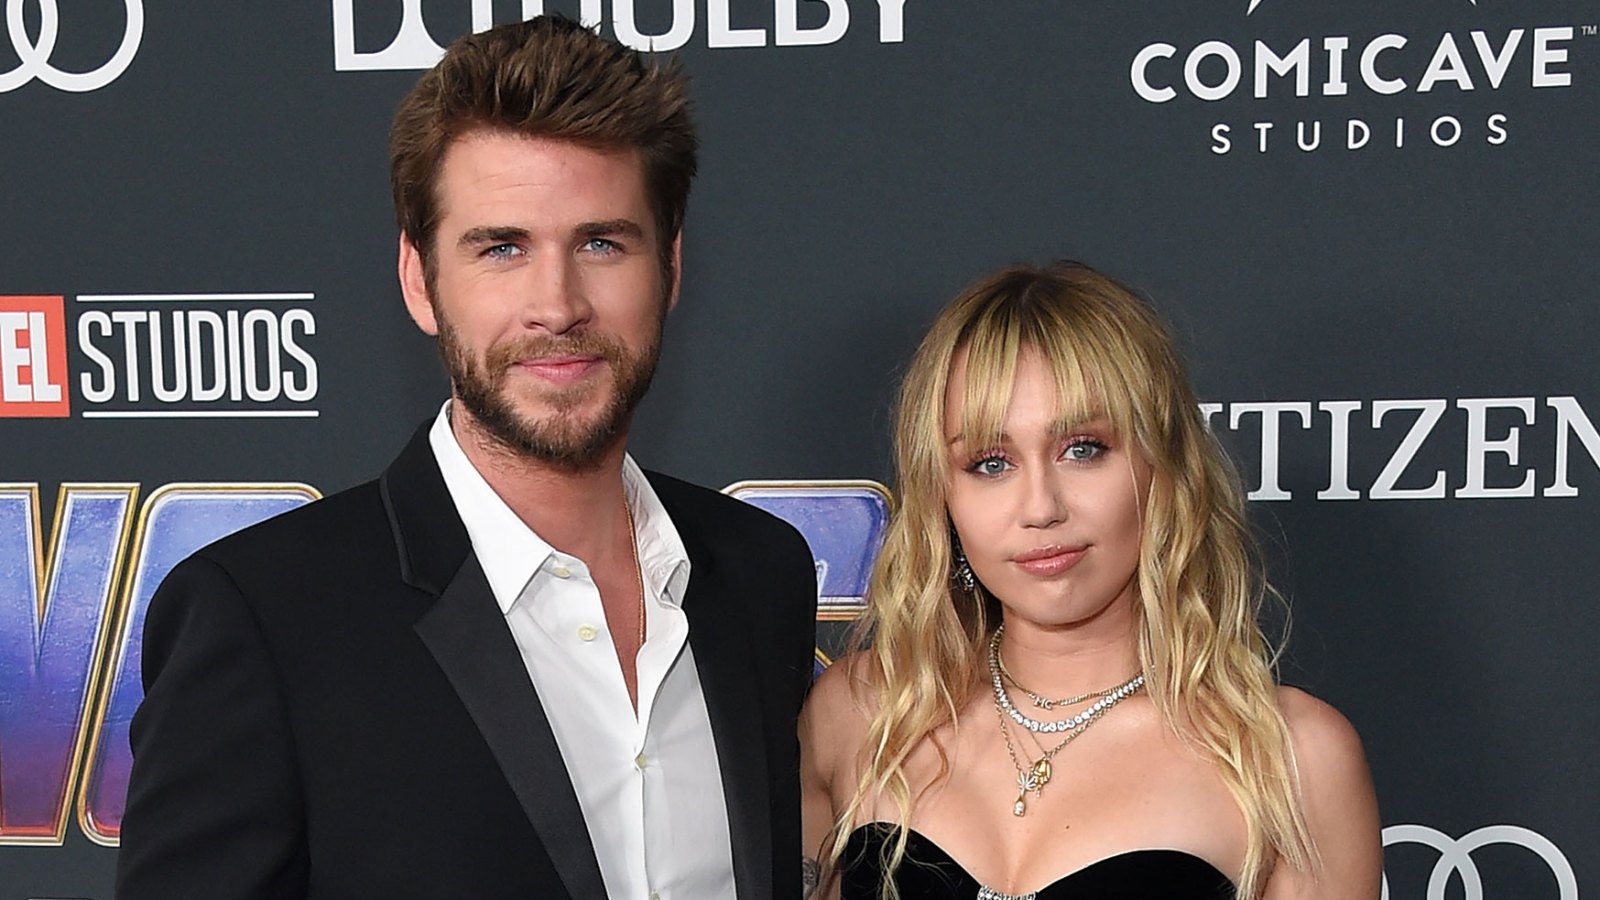 Miley Cyrus Calls Her Marriage to Liam Hemsworth a Fking Disaster During a Concert